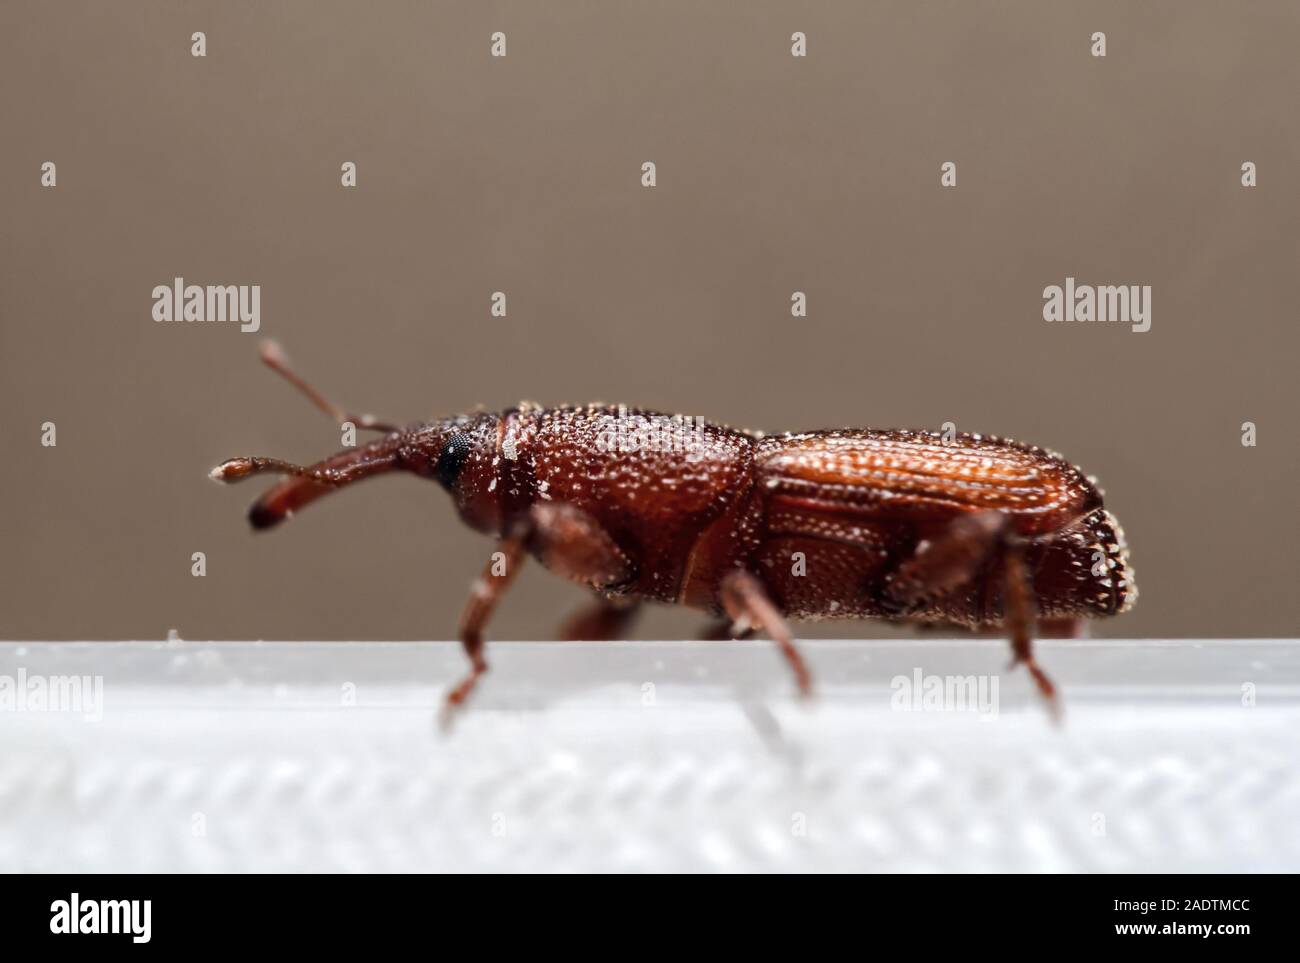 Macro Photography of Rice Weevil or Sitophilus oryzae Isolated on Background Stock Photo